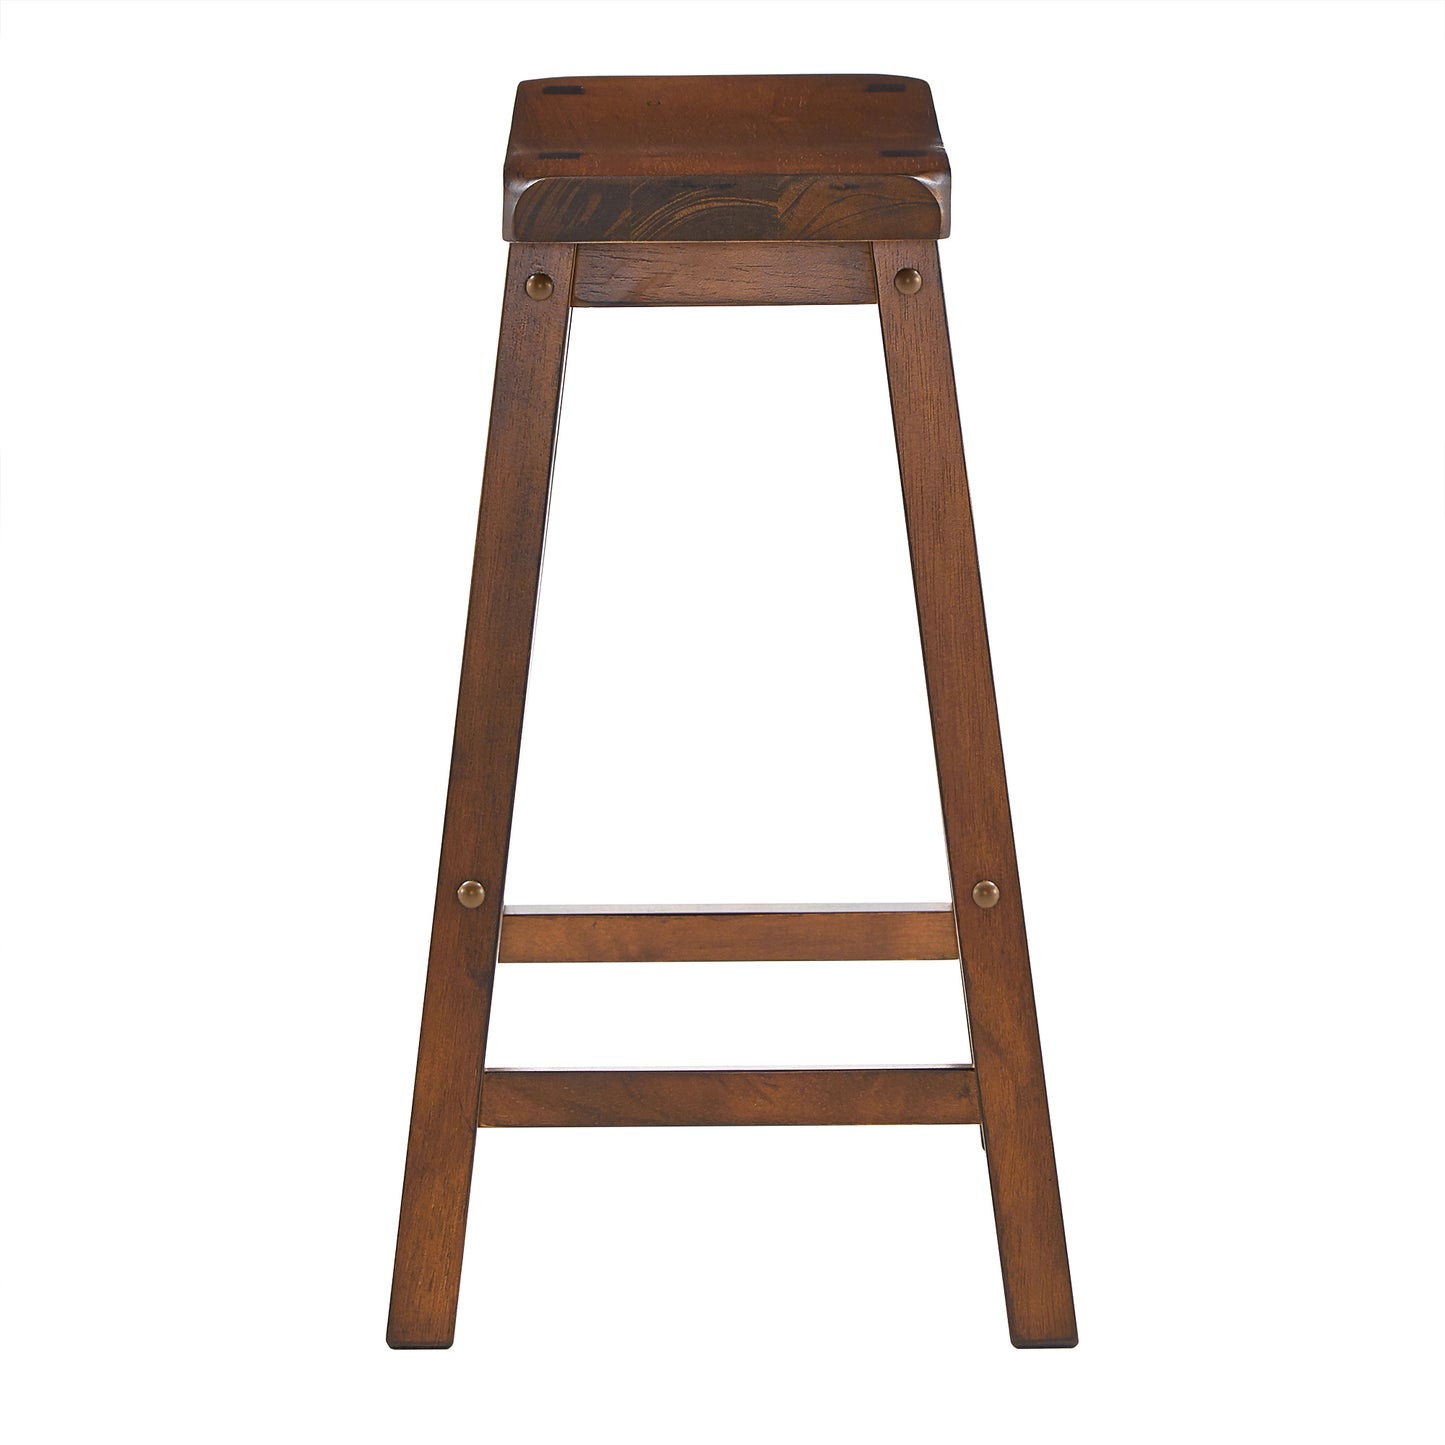 Saddle Seat 24" Counter Height Backless Stools (Set of 2) - Warm Cherry Finish